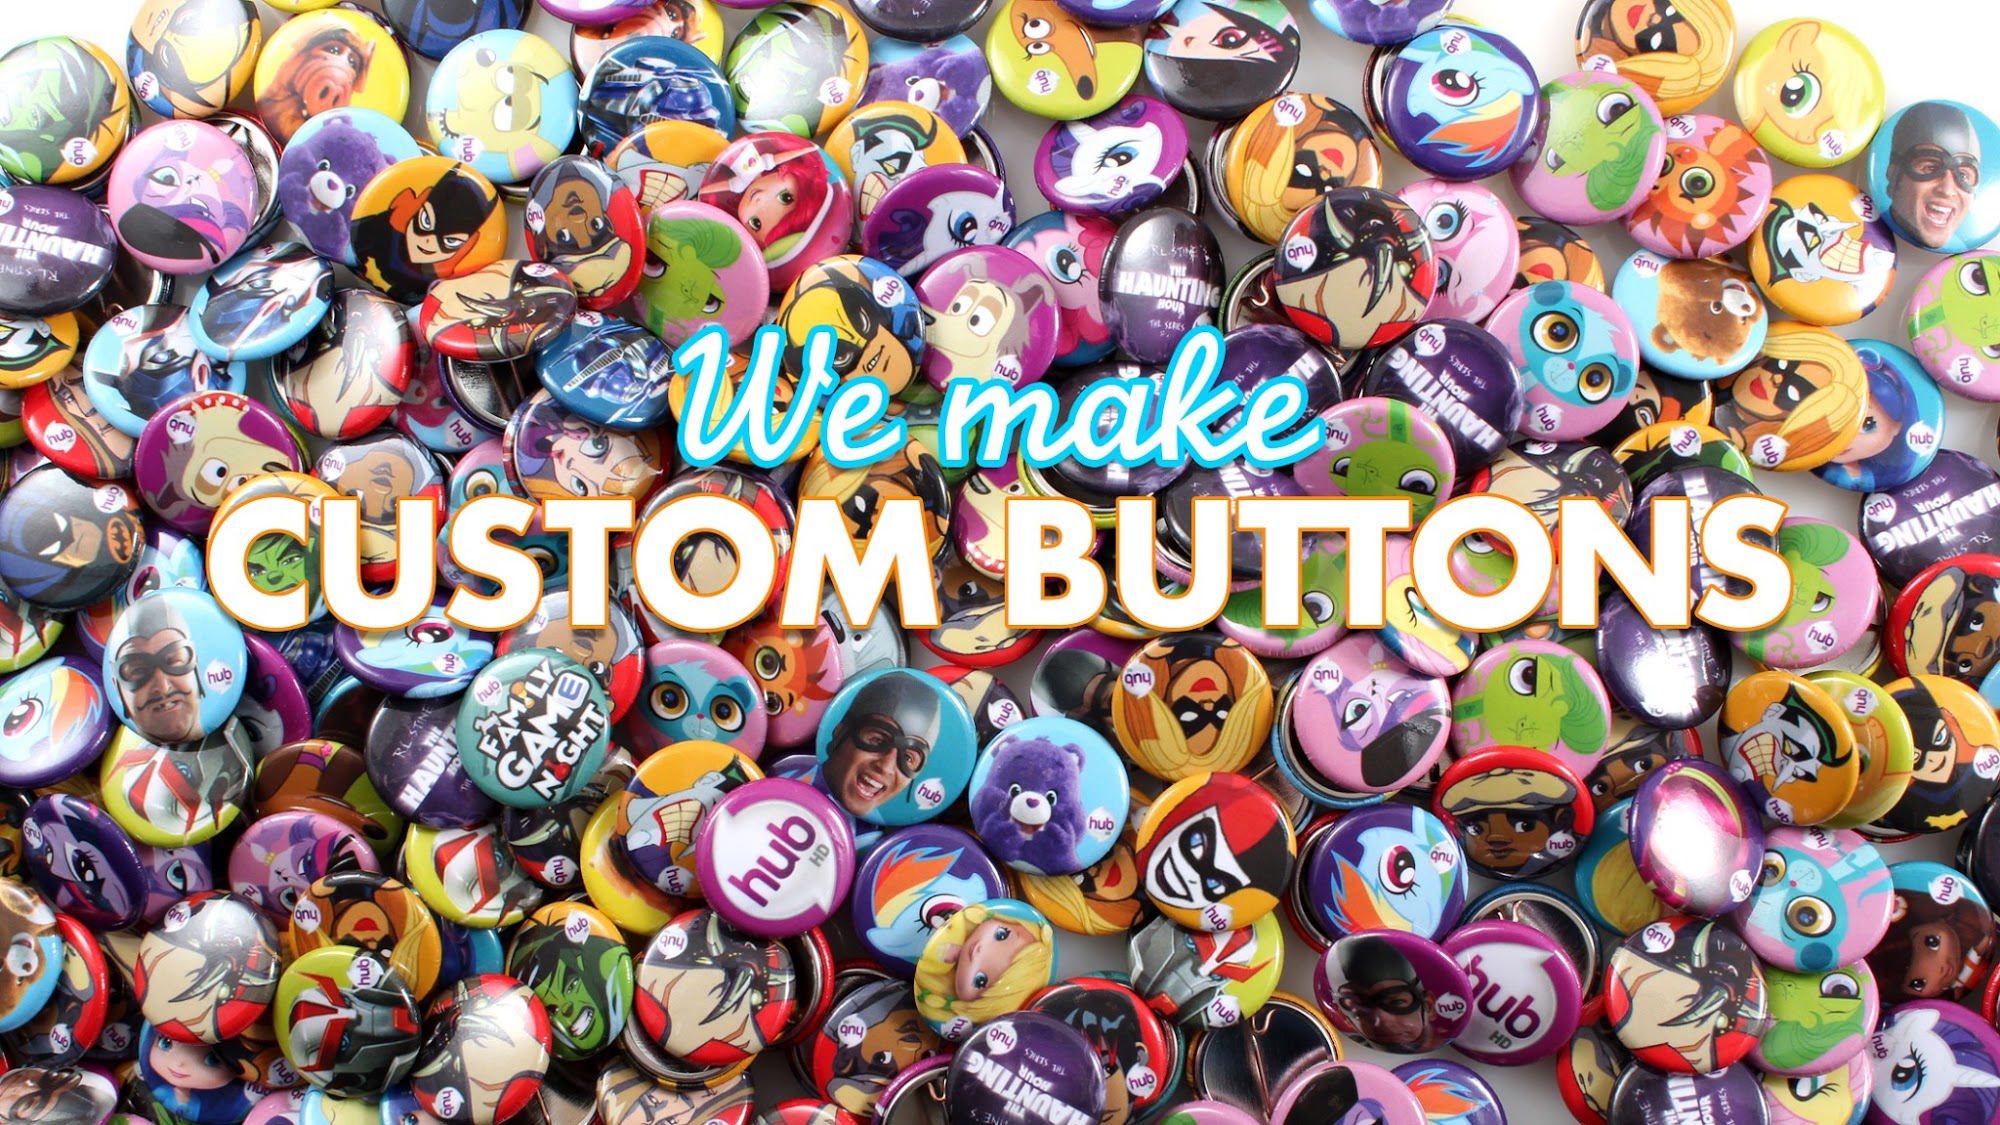 Pure Buttons